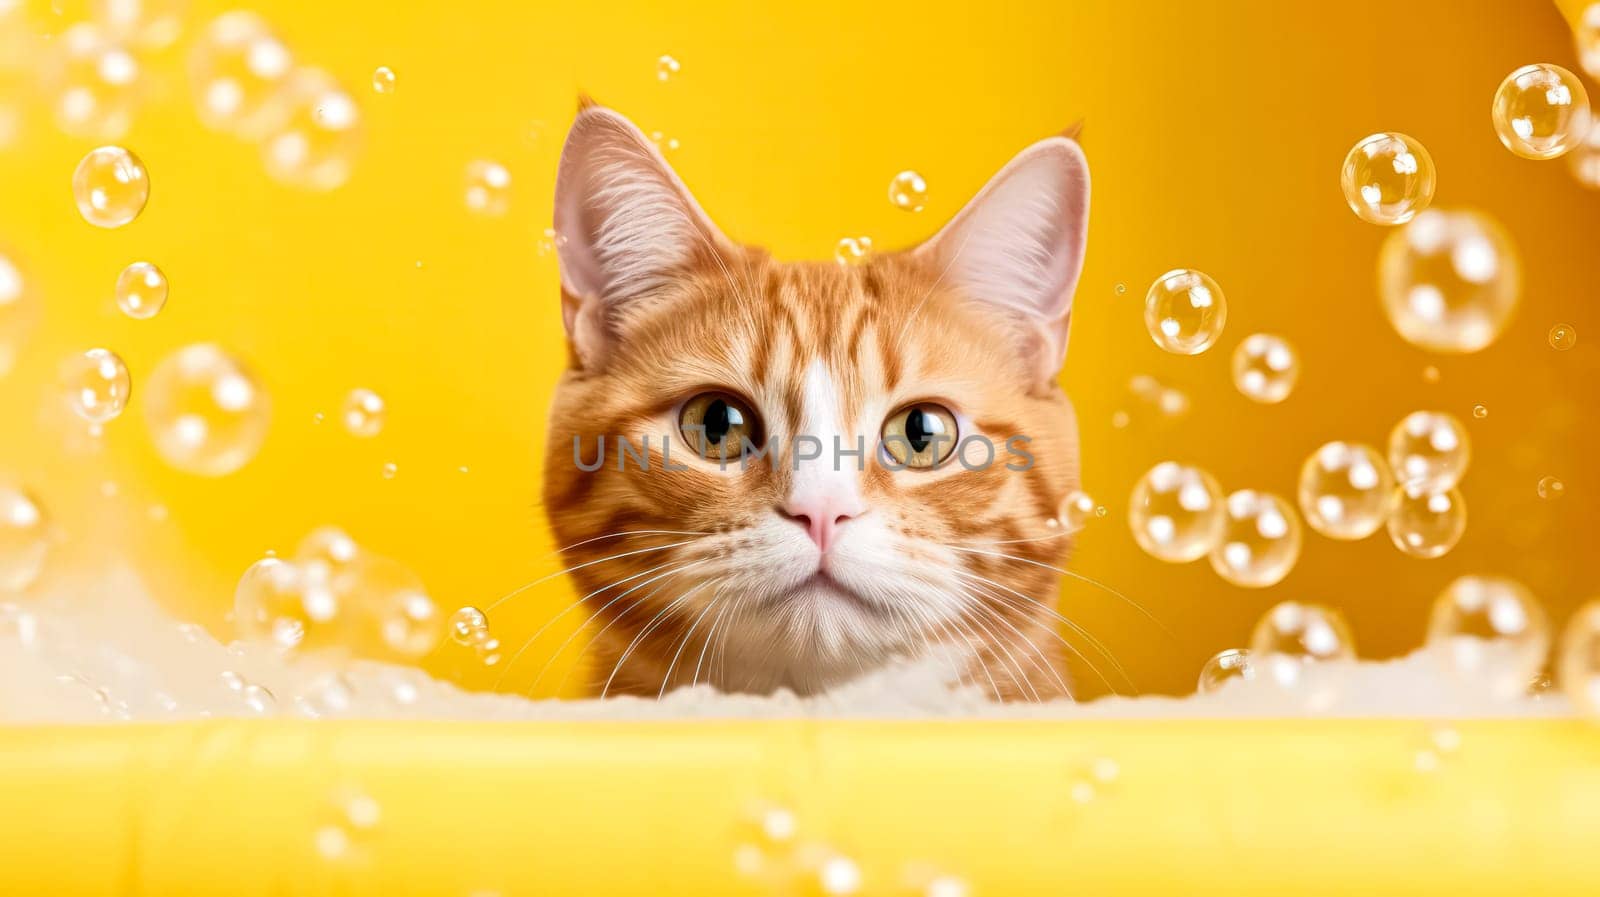 A playful red cat enjoys a bubbly bath in a bathtub, surrounded by soap bubbles, against a vibrant yellow background.